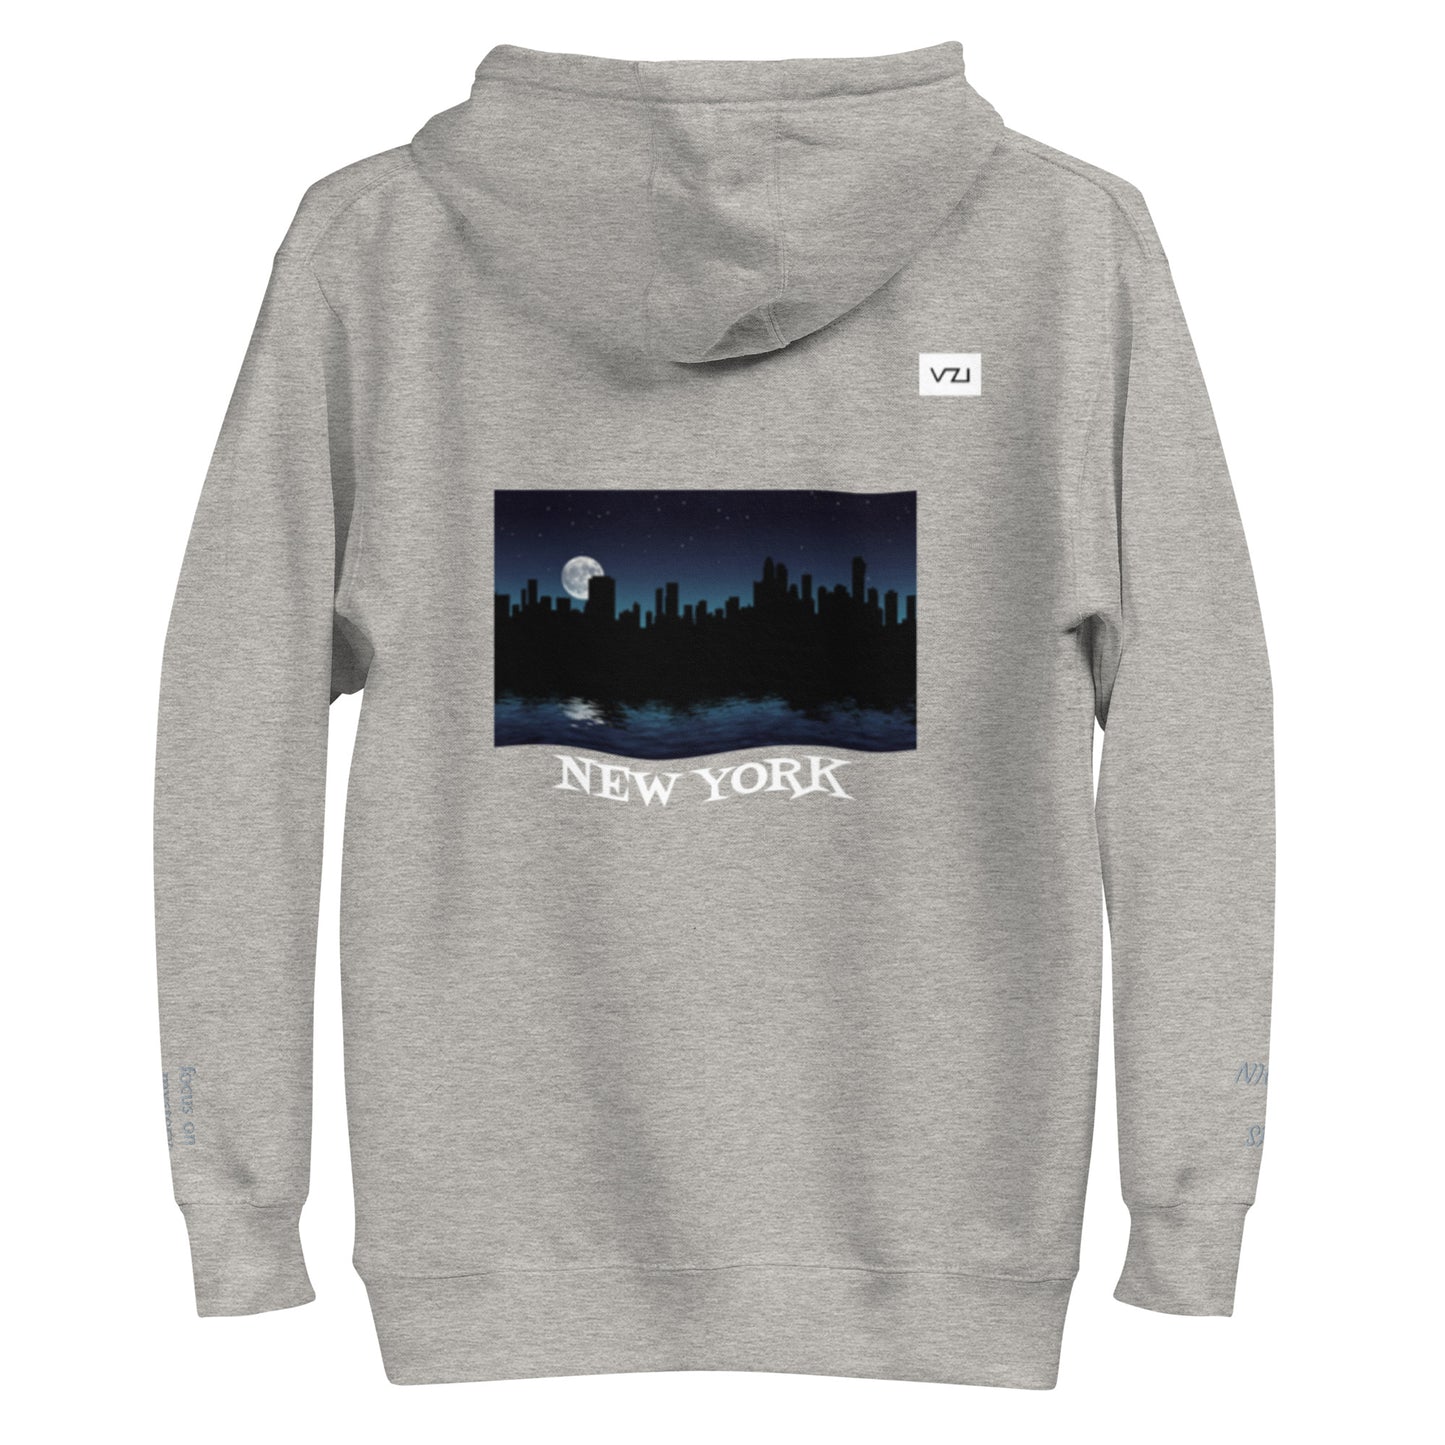 Lunaris: Unisex Hoodie, Classic Cotton: Focus on mystery and intuition(Night Sky)